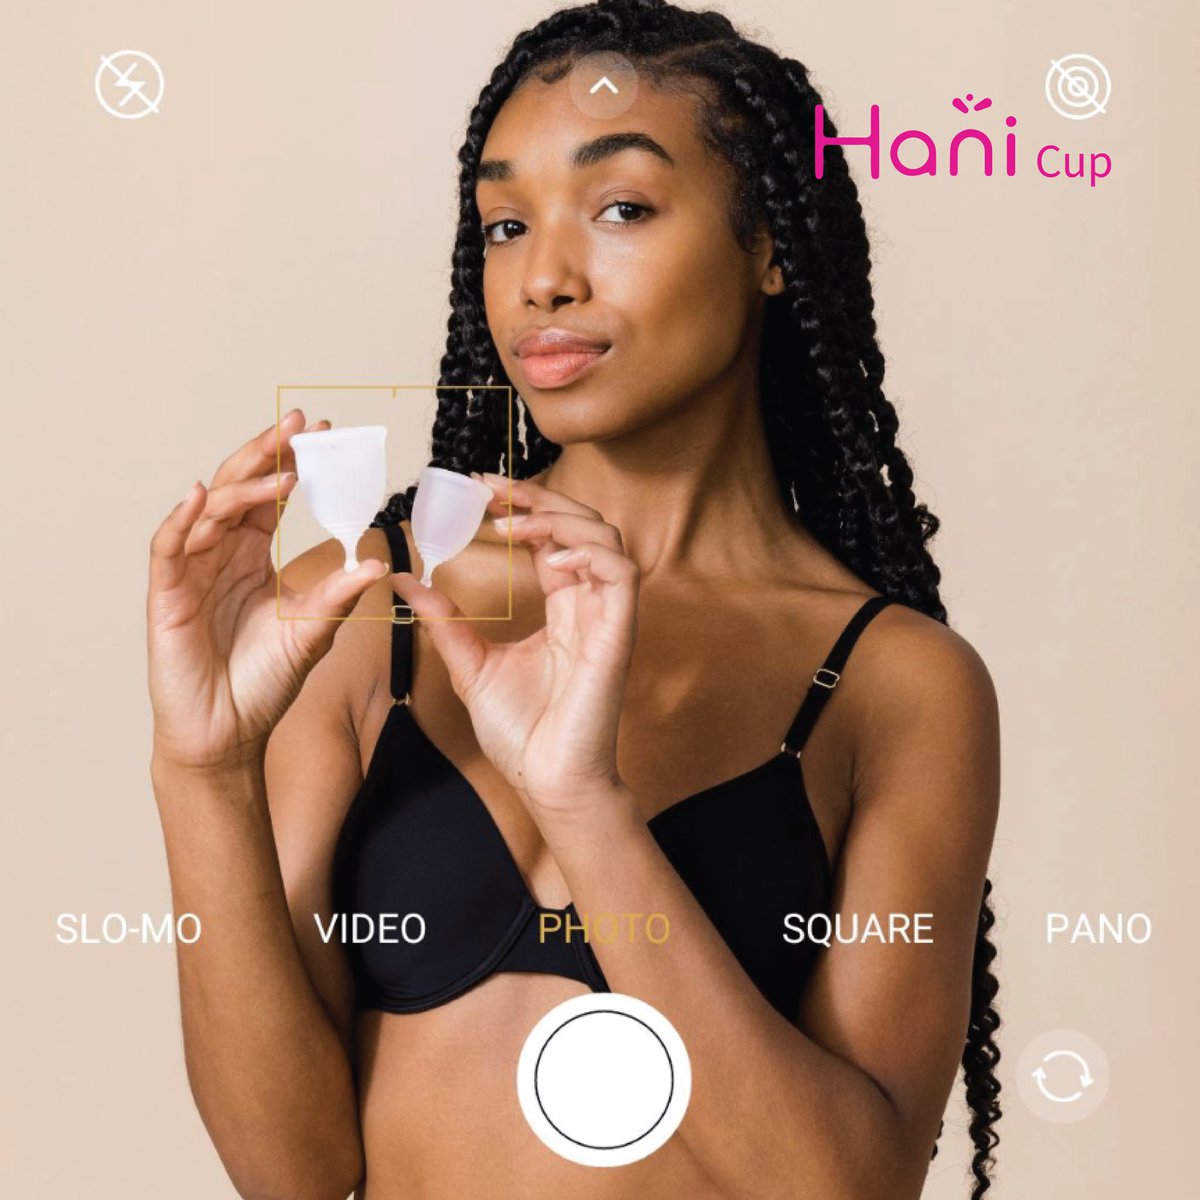 Finding your perfect fit: Our menstrual cup now  comes in two sizes for ultimate comfort and confidence. 

🌸 #PeriodPositive #MenstrualHealth #Kenya #HaniCup #PeriodFreedom #ALifeChangingGift